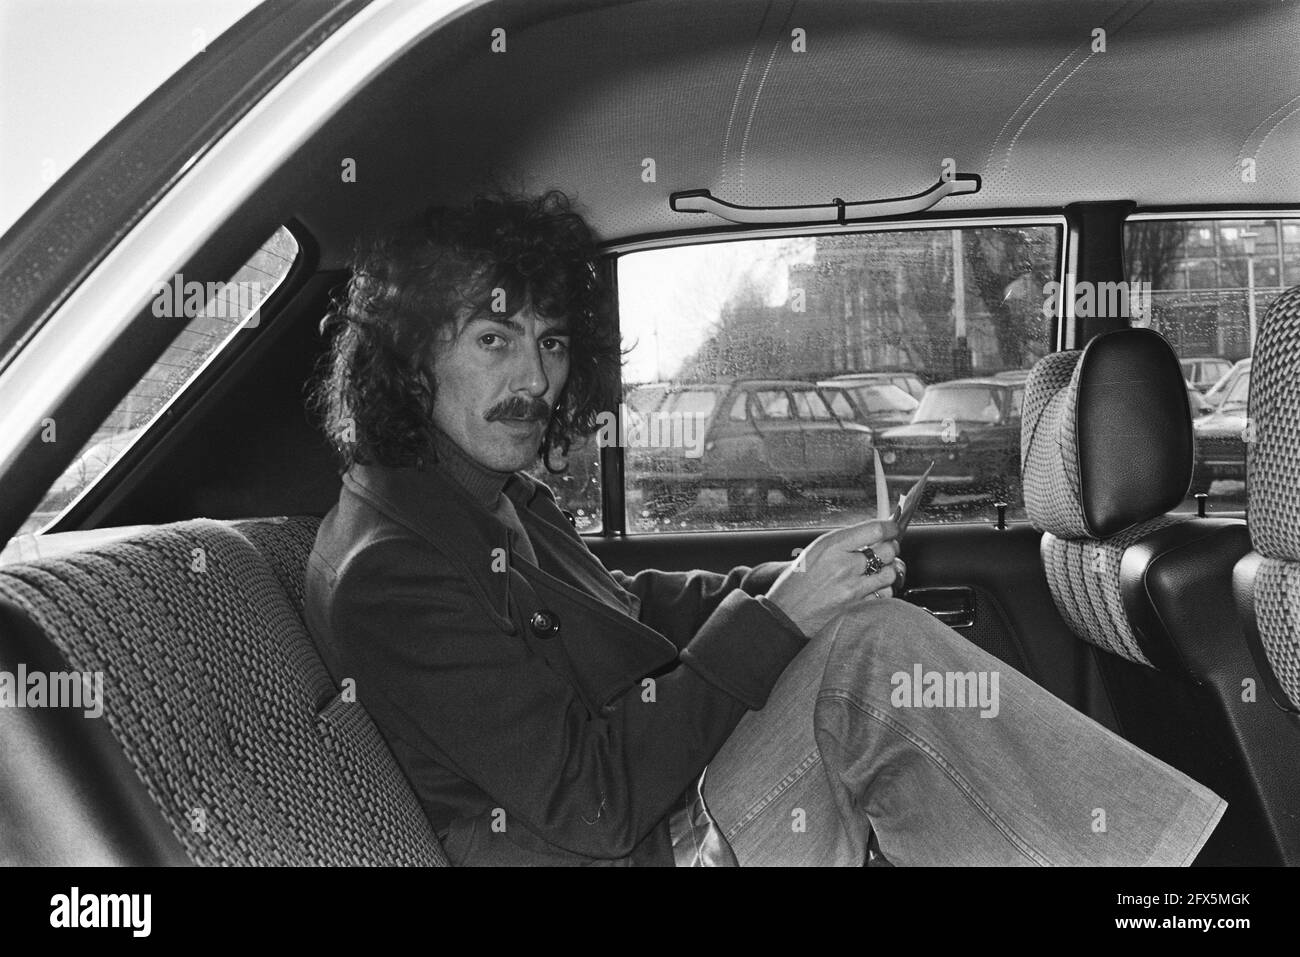 George Harrison leaves Hilton, in car, February 4, 1977, The Netherlands, 20th century press agency photo, news to remember, documentary, historic photography 1945-1990, visual stories, human history of the Twentieth Century, capturing moments in time Stock Photo